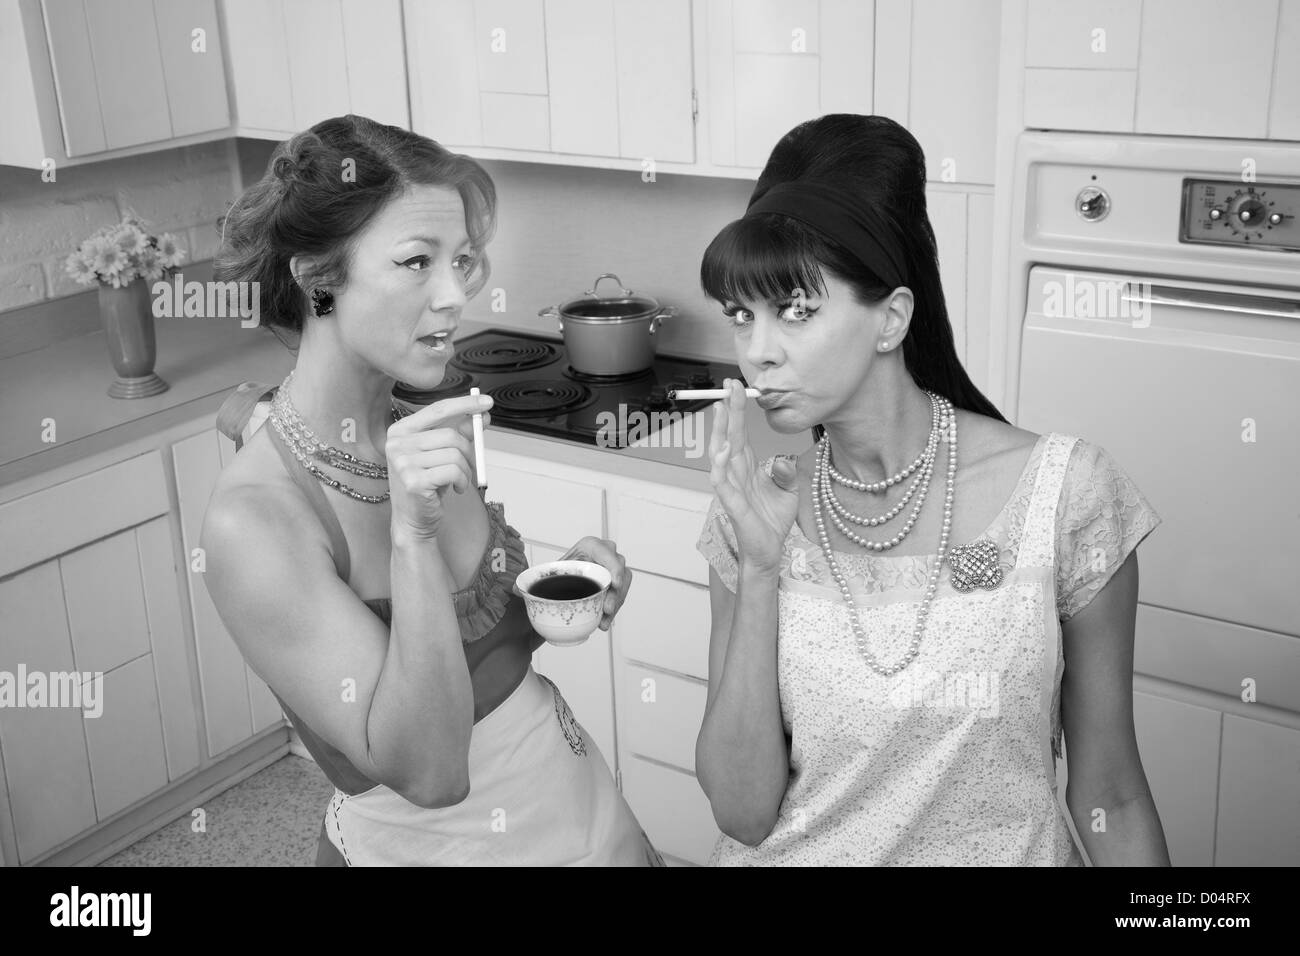 Two middle-aged retro styled women smoking cigarettes and having coffee Stock Photo